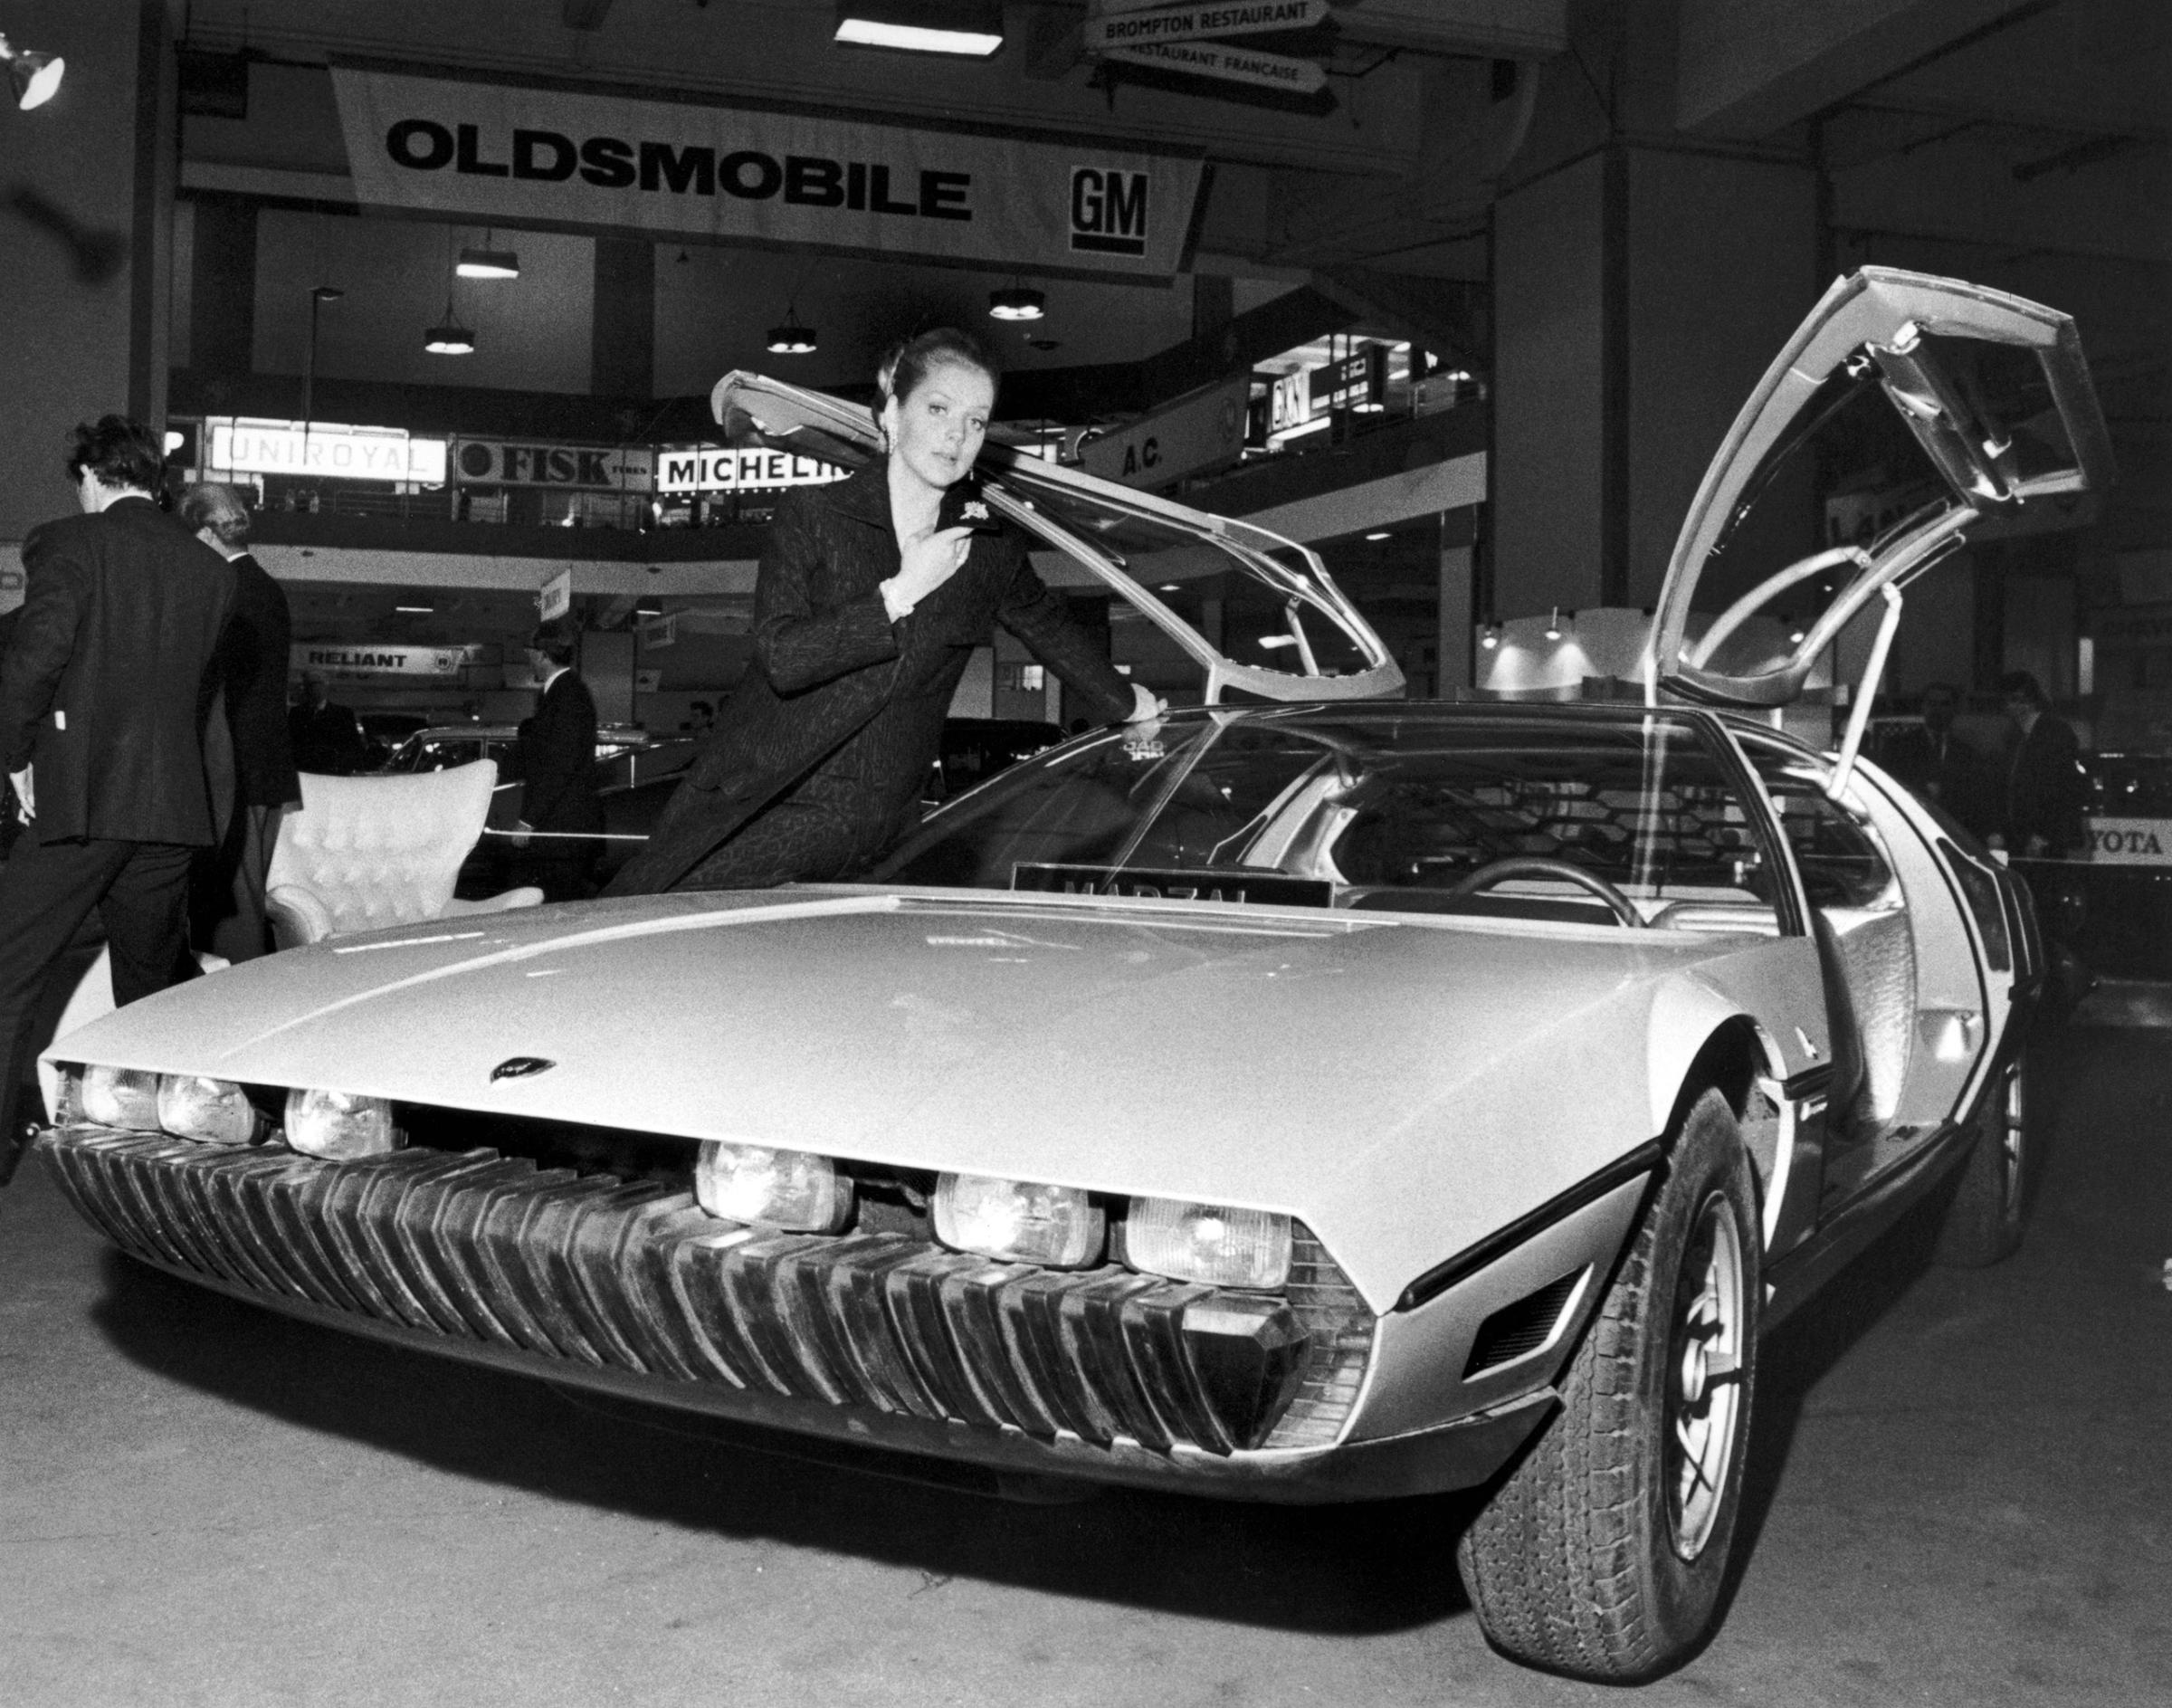 The Lamborghini Marzal, a one-off prototype concept car, designed by by Marcello Gandini of the Bertone design studio, at a preview of the London Motor Show at Earl's Court, Oct. 17, 1967.